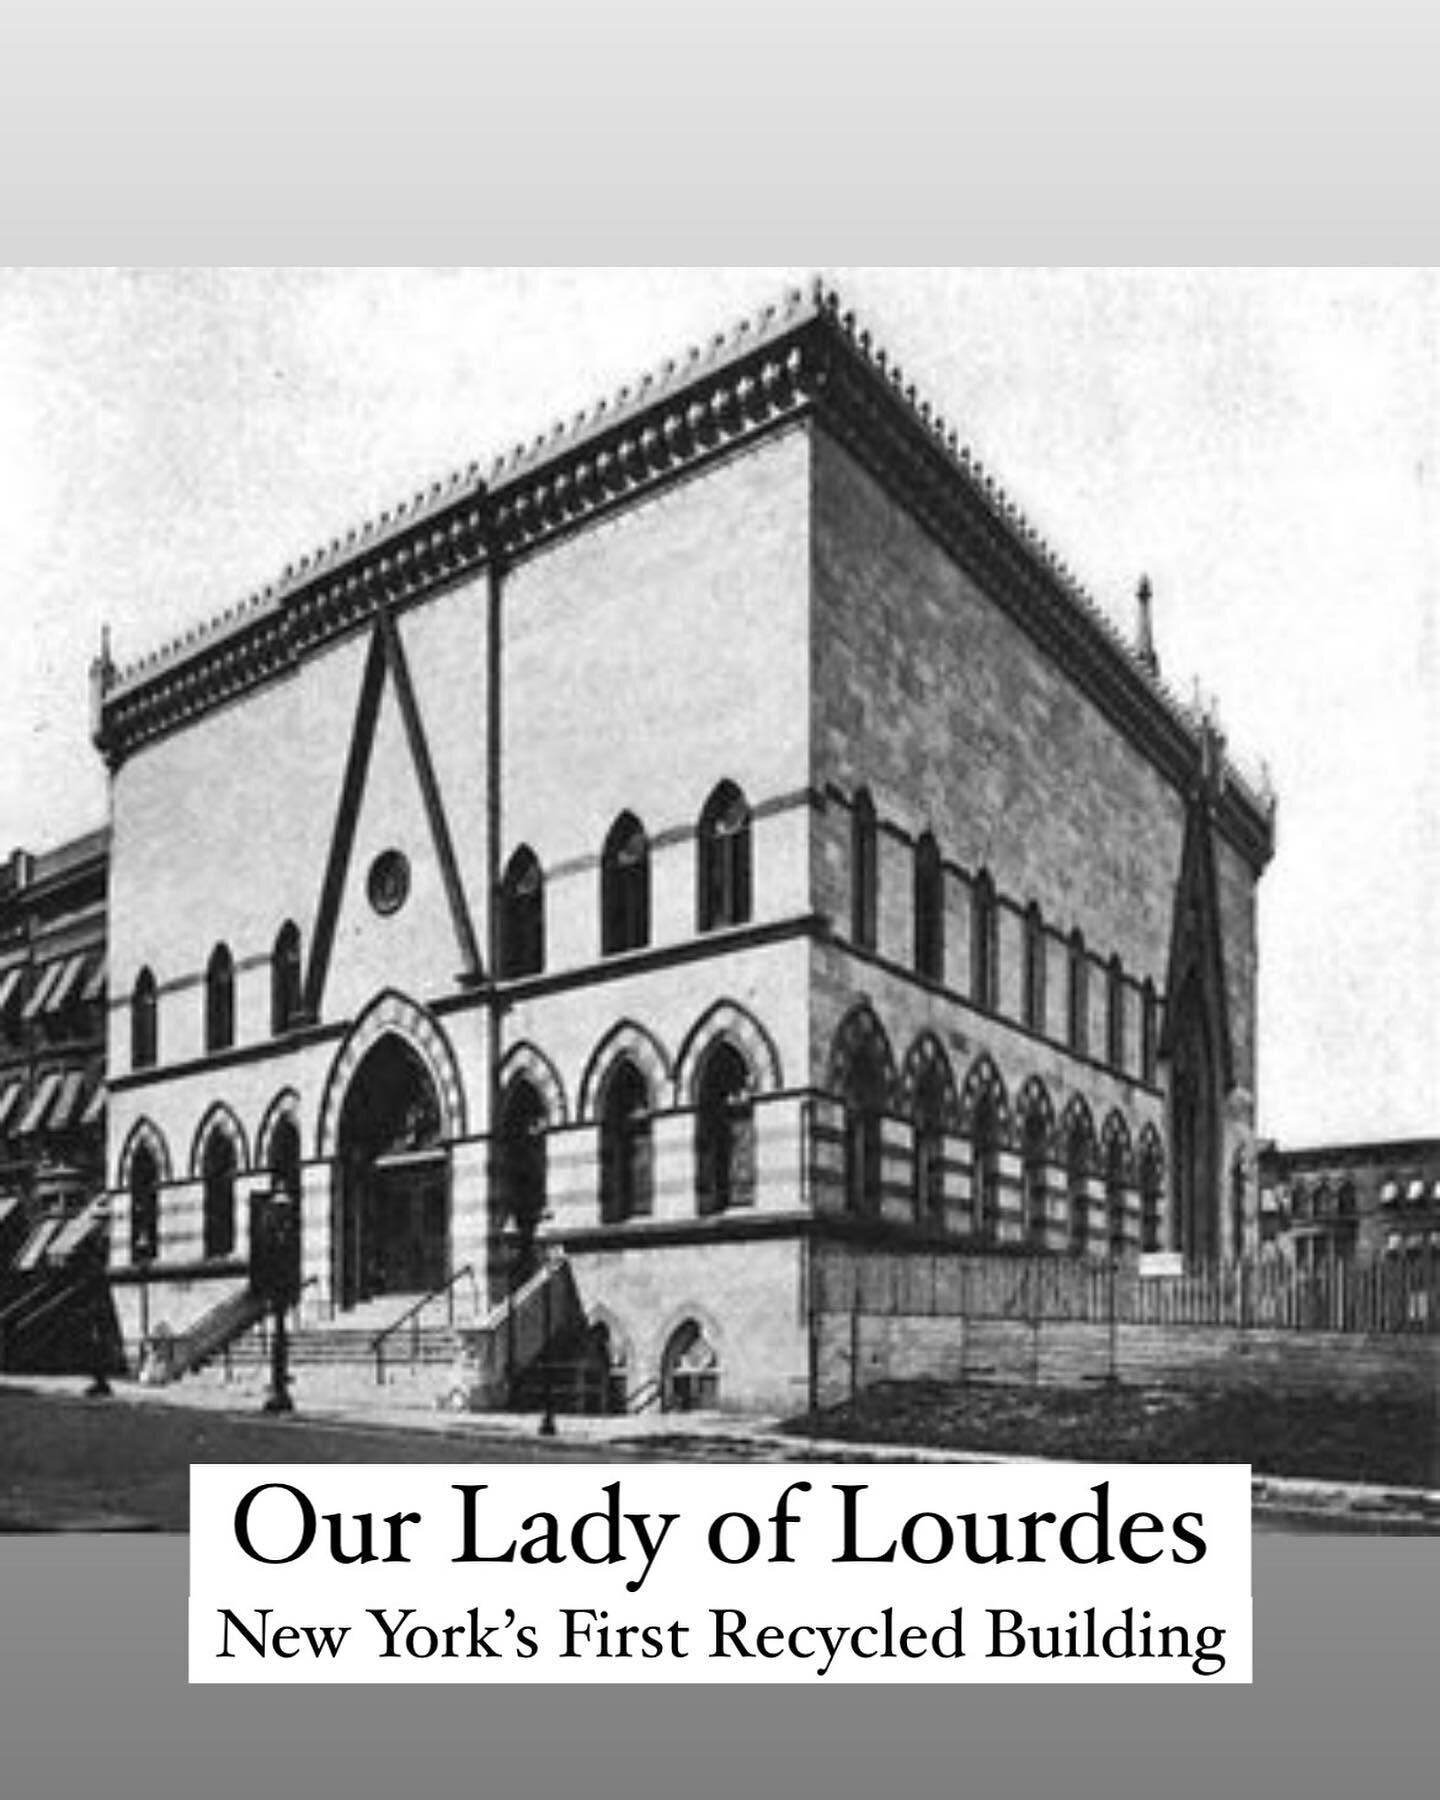 On Sunday May 18, 1902, the cornerstone of Our Lady of Lourdes Catholic Church was laid on 142nd Street in upper Harlem. For decades, people had been flocking to these blocks of the West 140s, attracted by rows of attractive new houses set in the pea